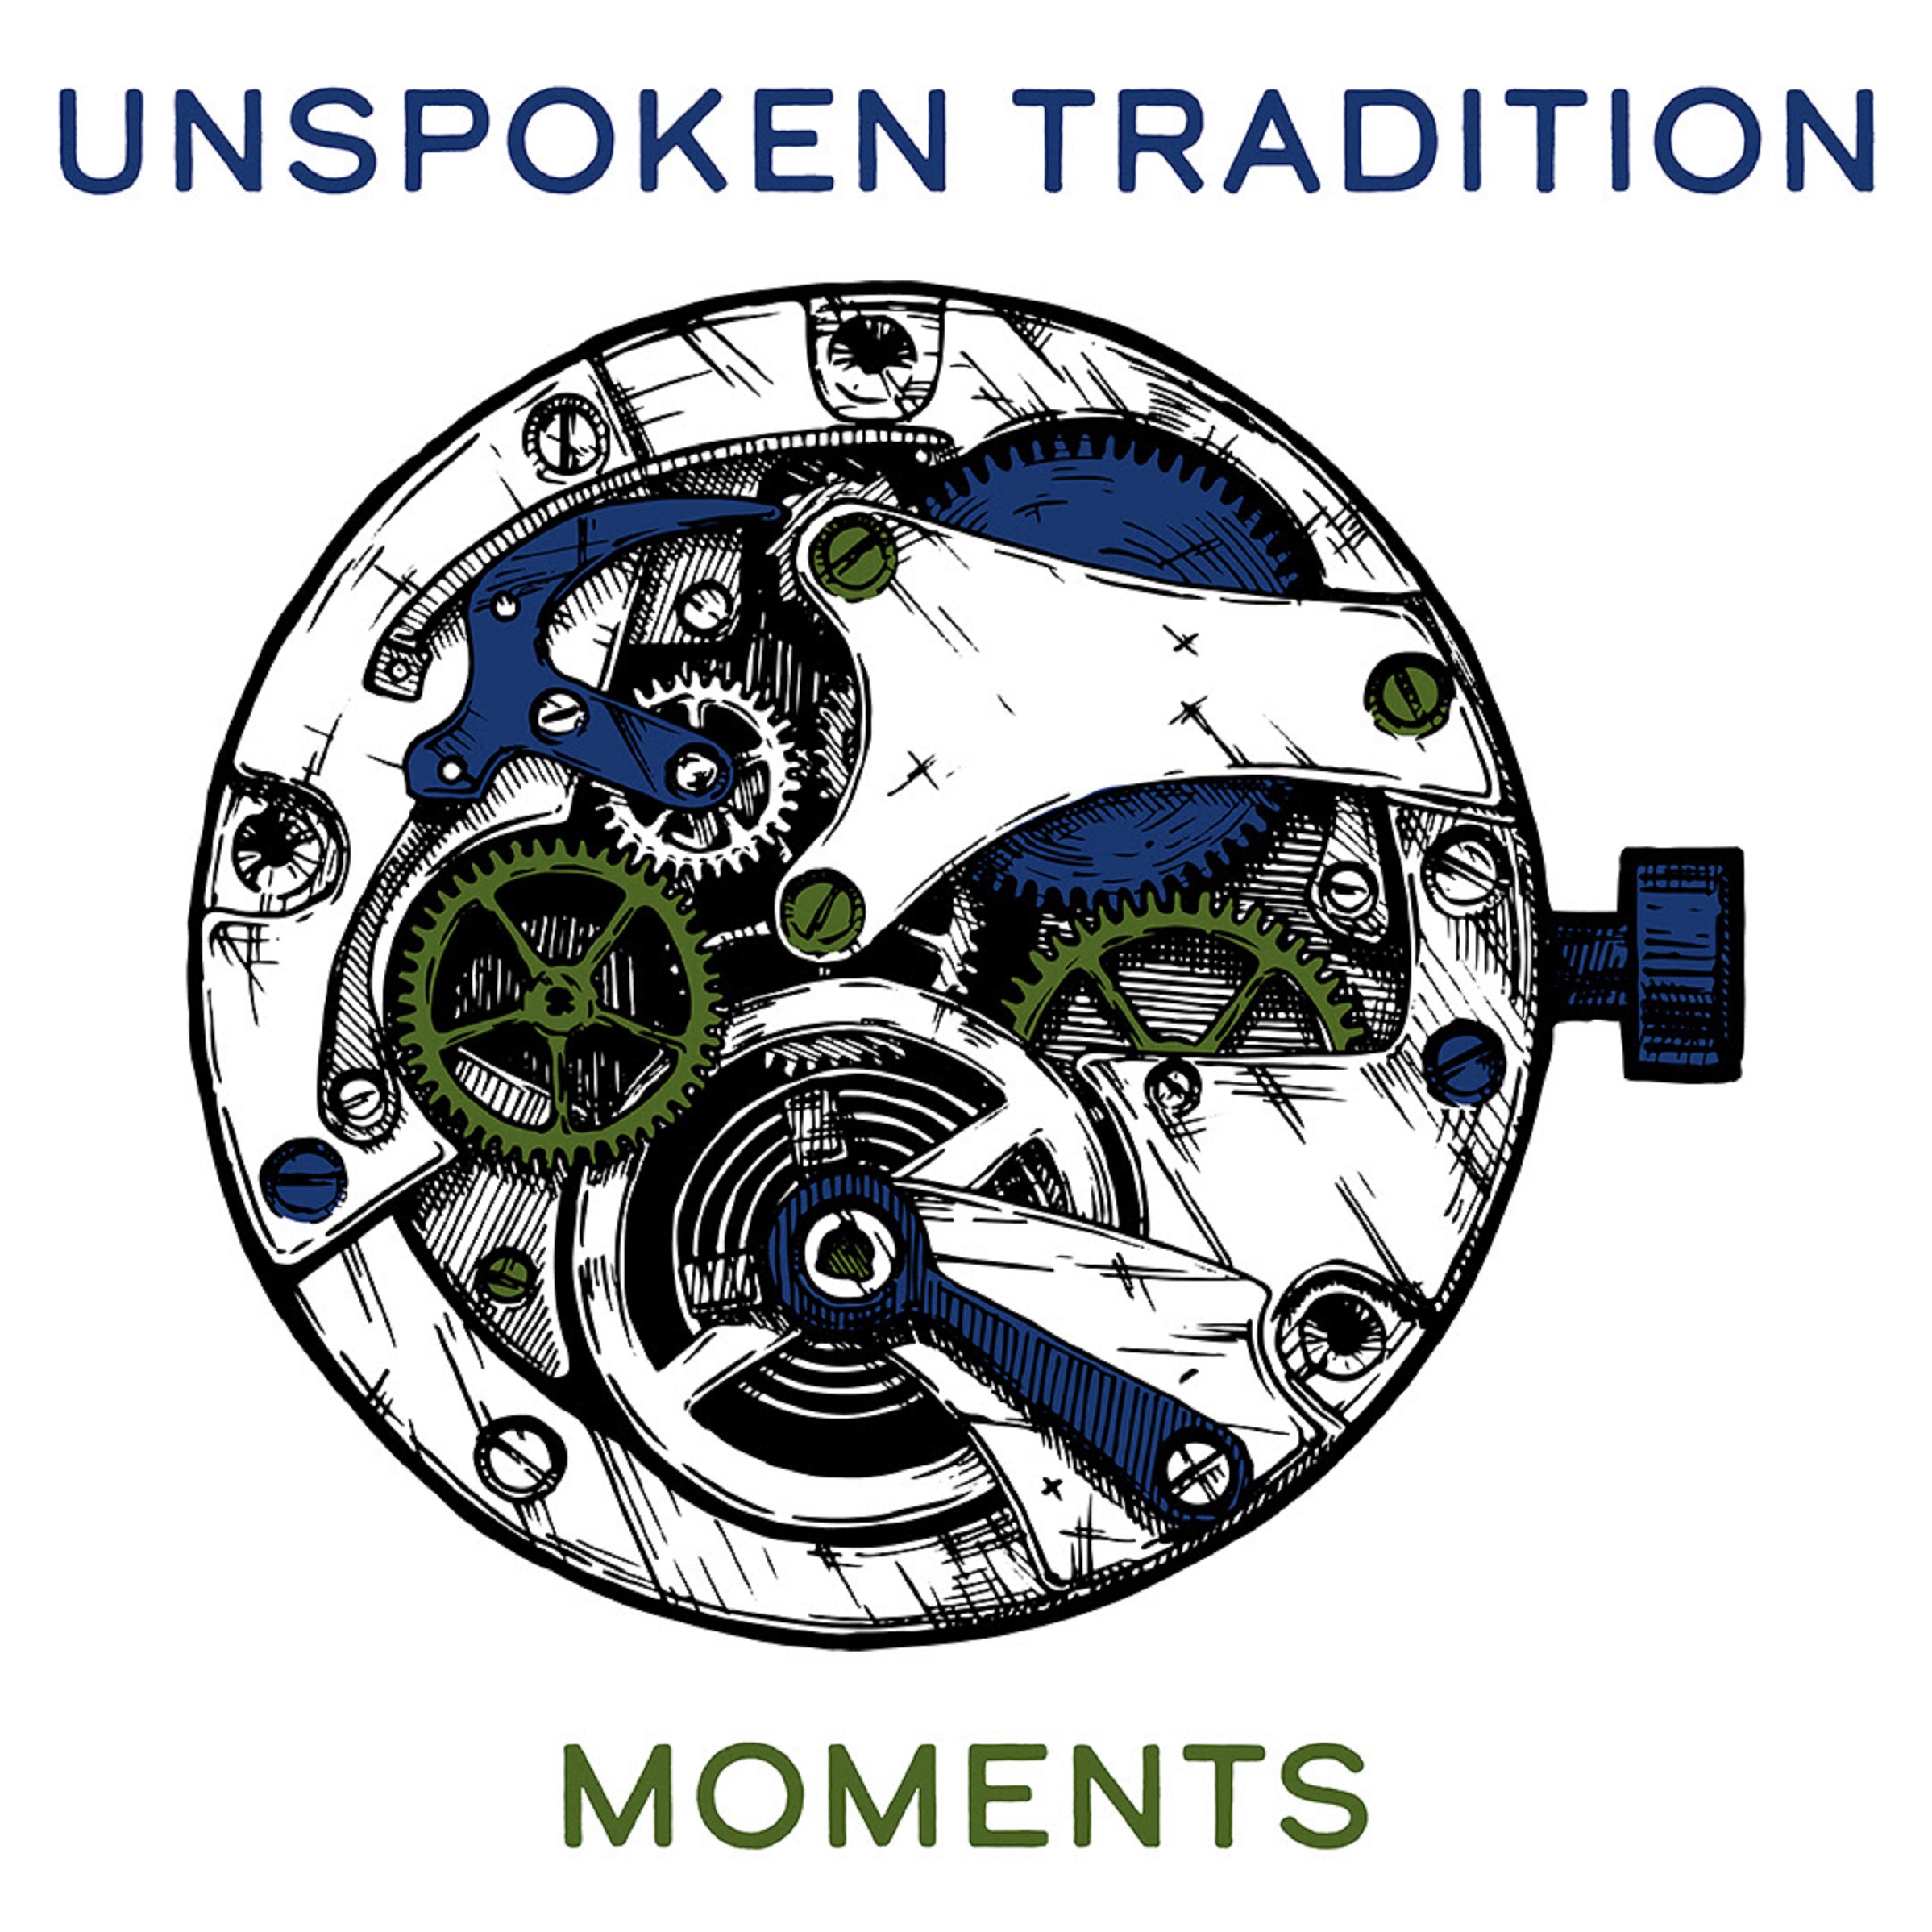 Unspoken Tradition’s “Moments” reflects on the power of memories